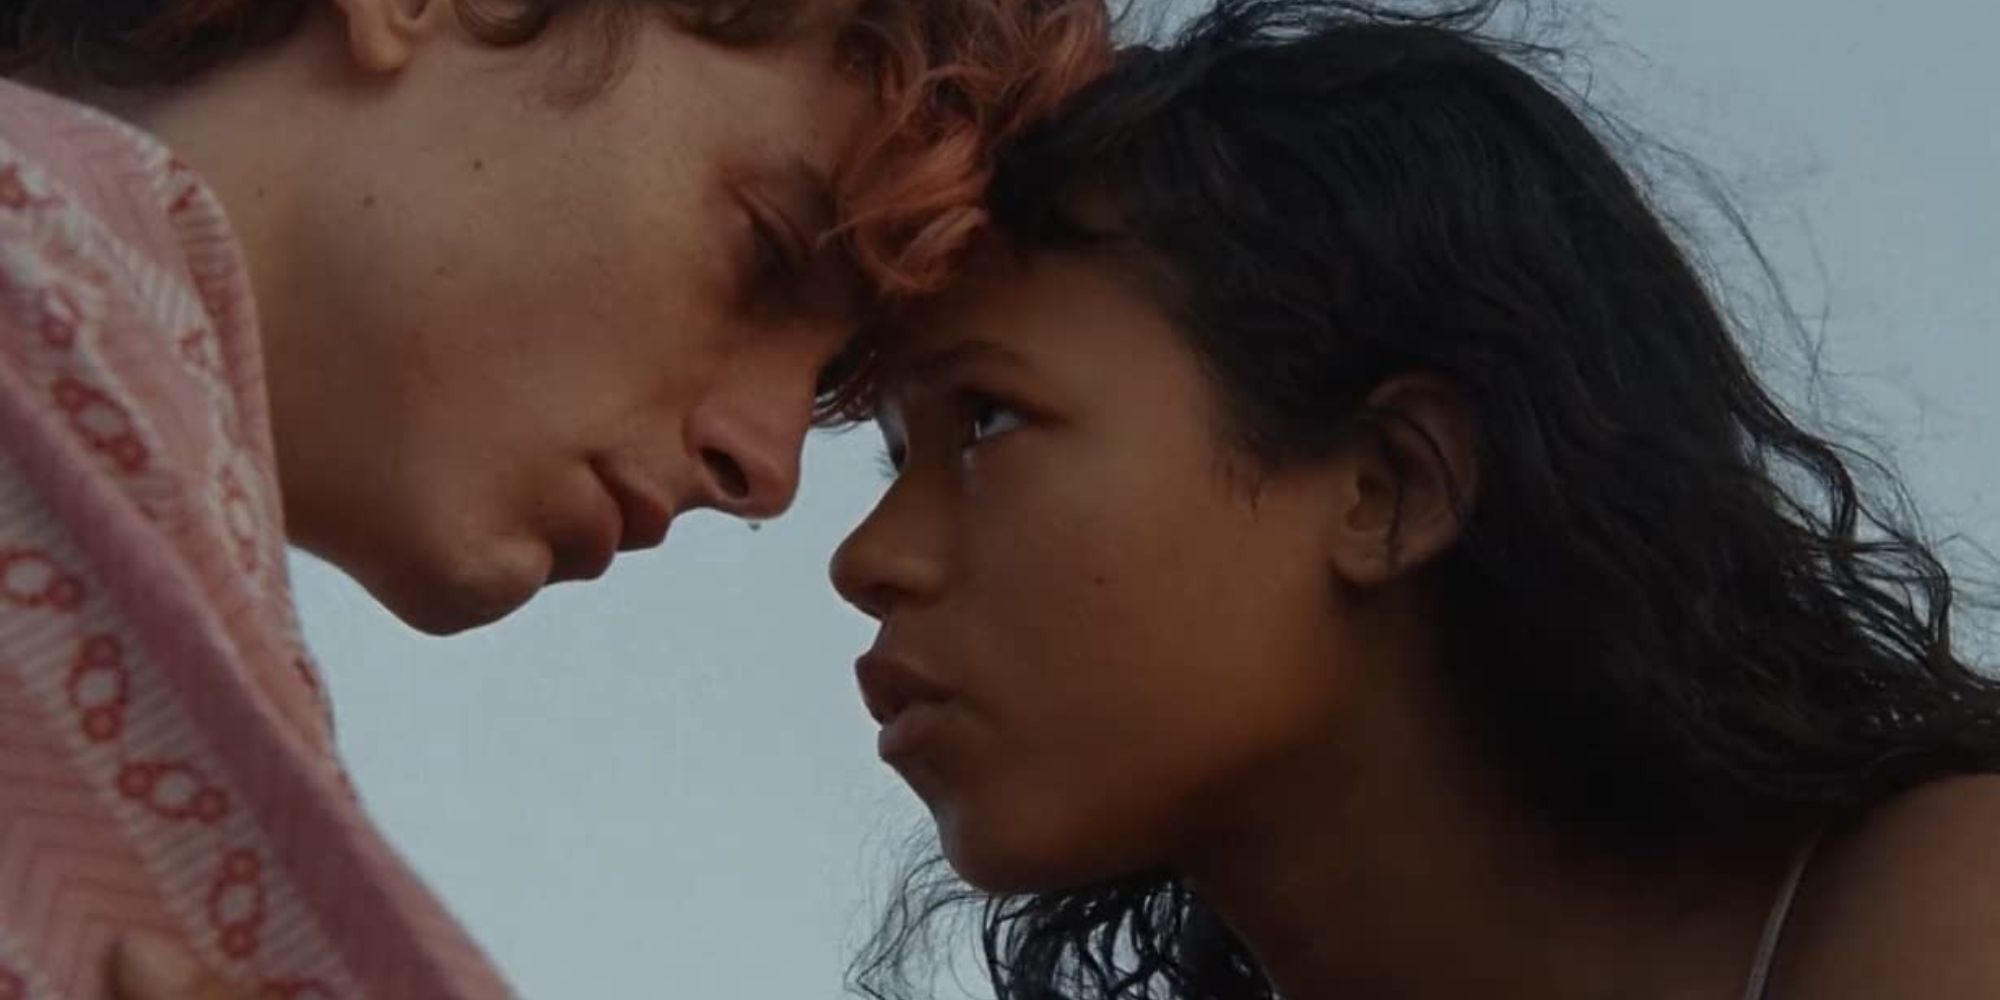 A teenage girl and boy press their foreheads together while gazing into each other's eyes